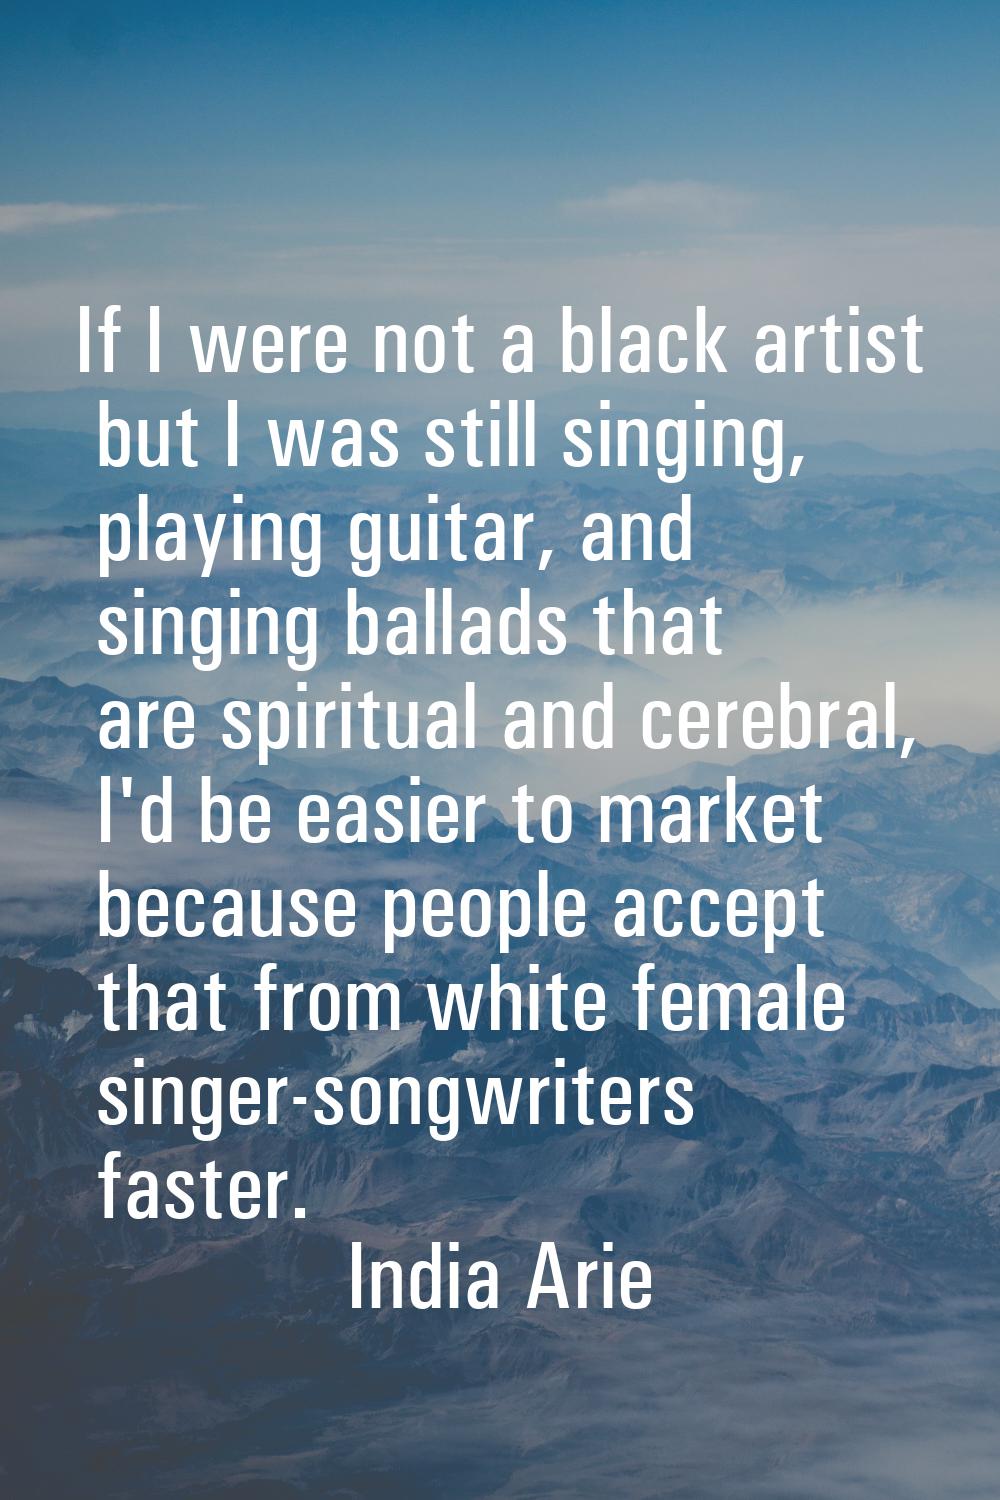 If I were not a black artist but I was still singing, playing guitar, and singing ballads that are 